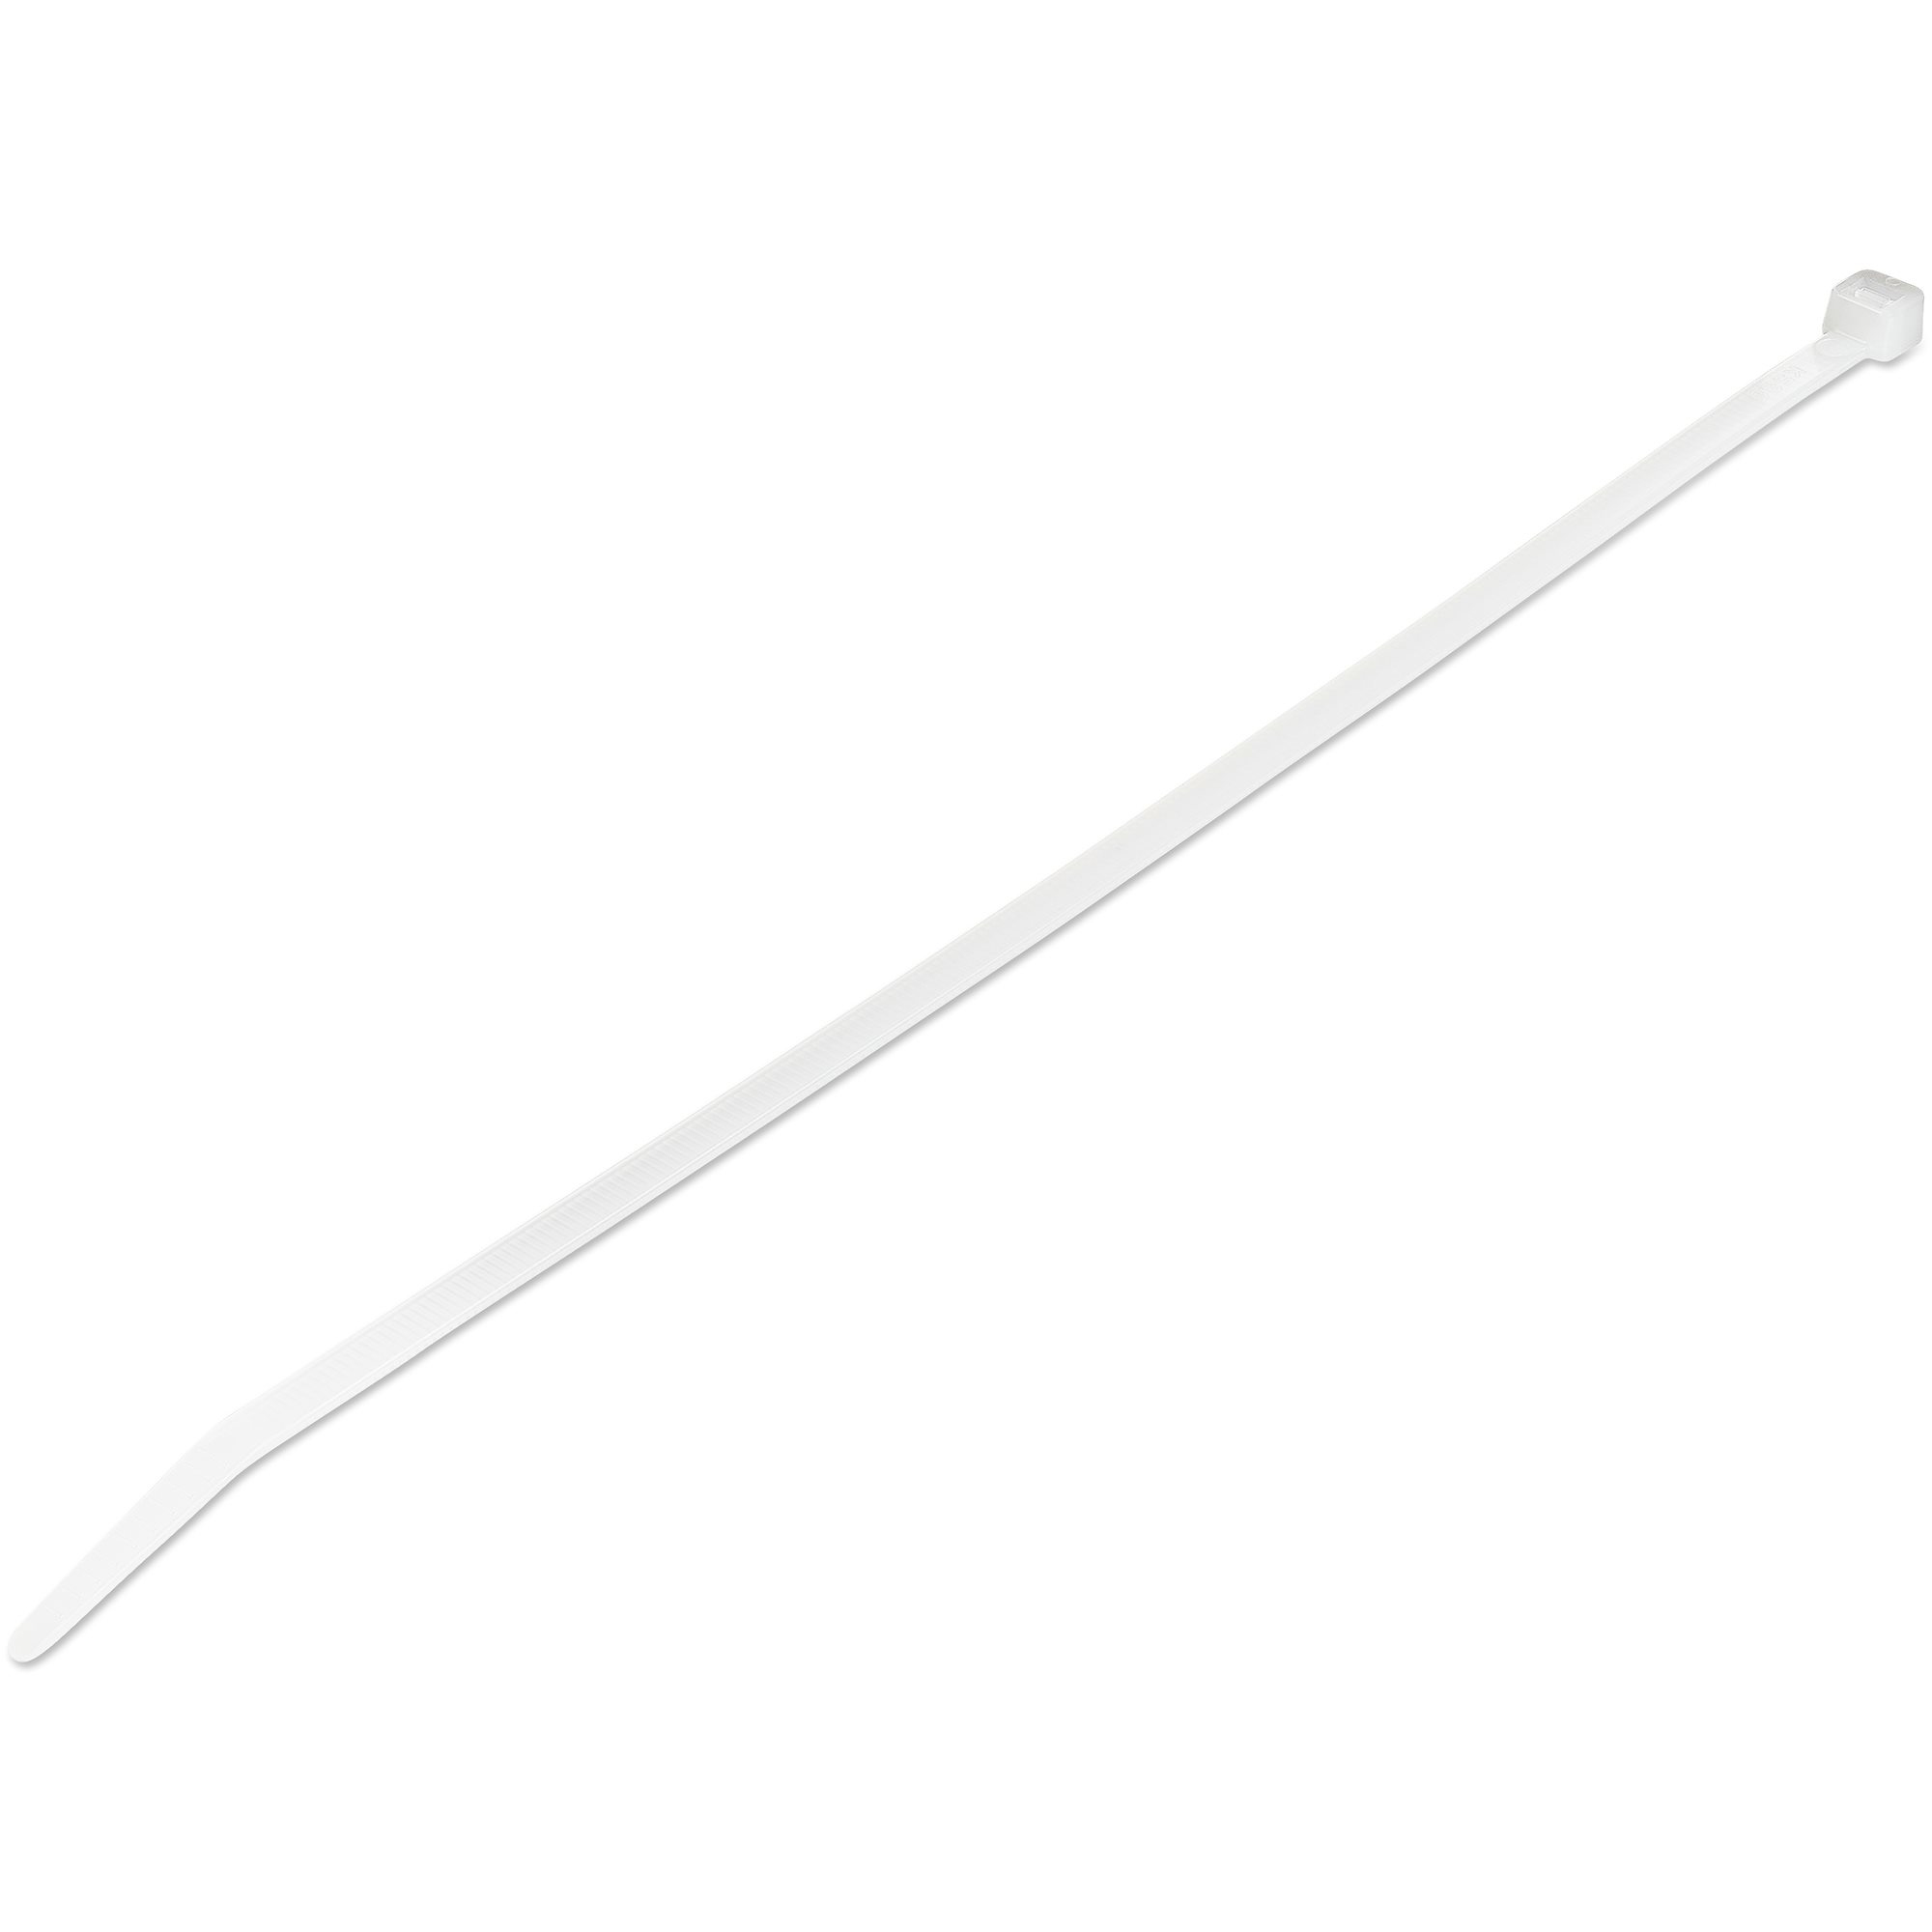 StarTech.com 10"(25cm) Cable Ties, 1/8"(4mm) wide, 2-5/8"(68mm) Bundle Diameter, 50lb(22kg) Tensile Strength, Nylon Self Locking Zip Ties w/Curved Tip, 94V-2/UL Listed, 1000 Pack, White - Nylon 66 Plastic - TAA (CBMZT10NK)